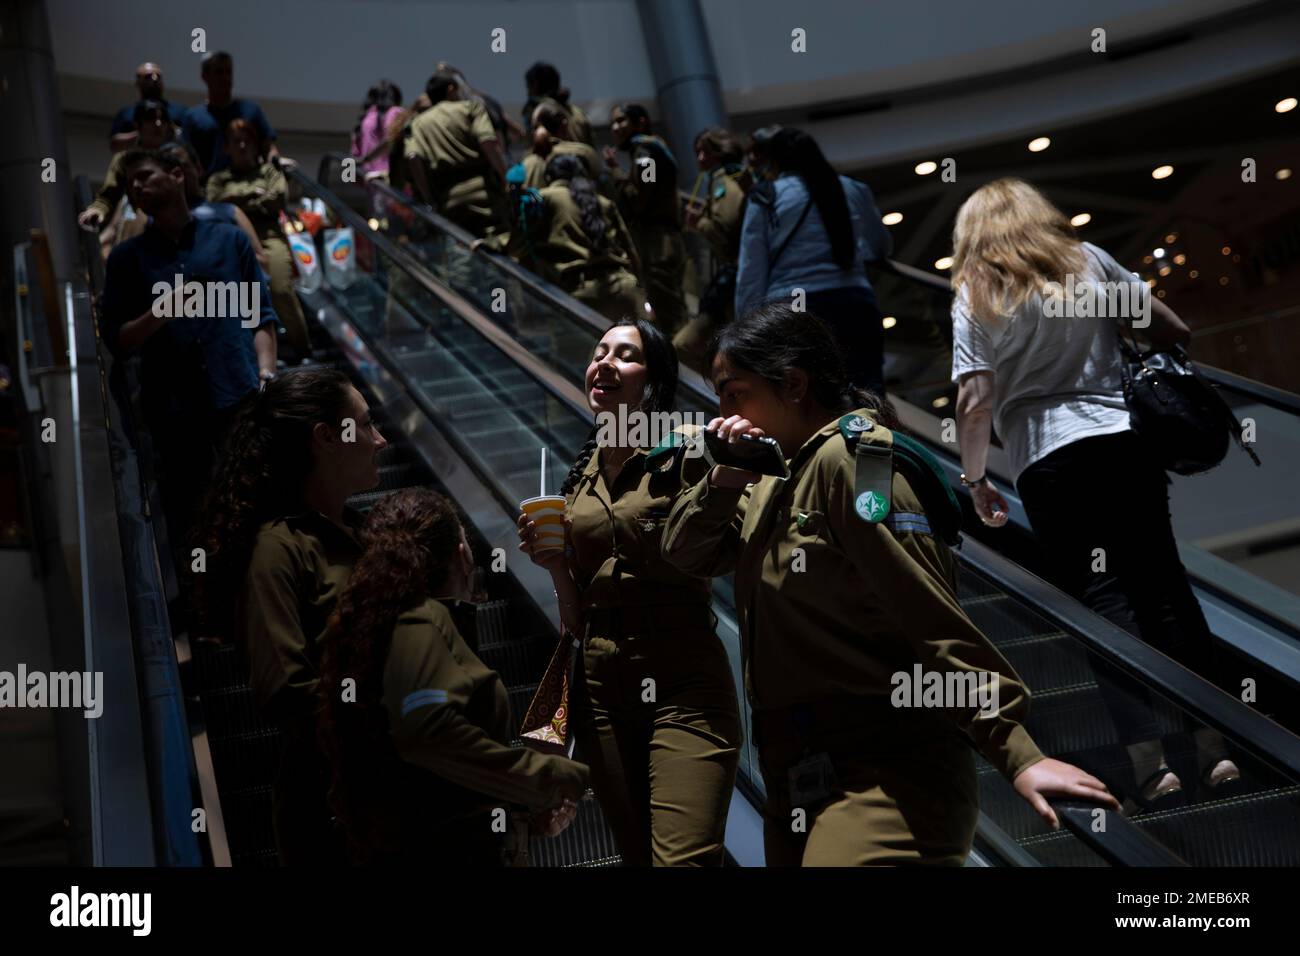 People ride an escalator at a shopping mall after restrictions